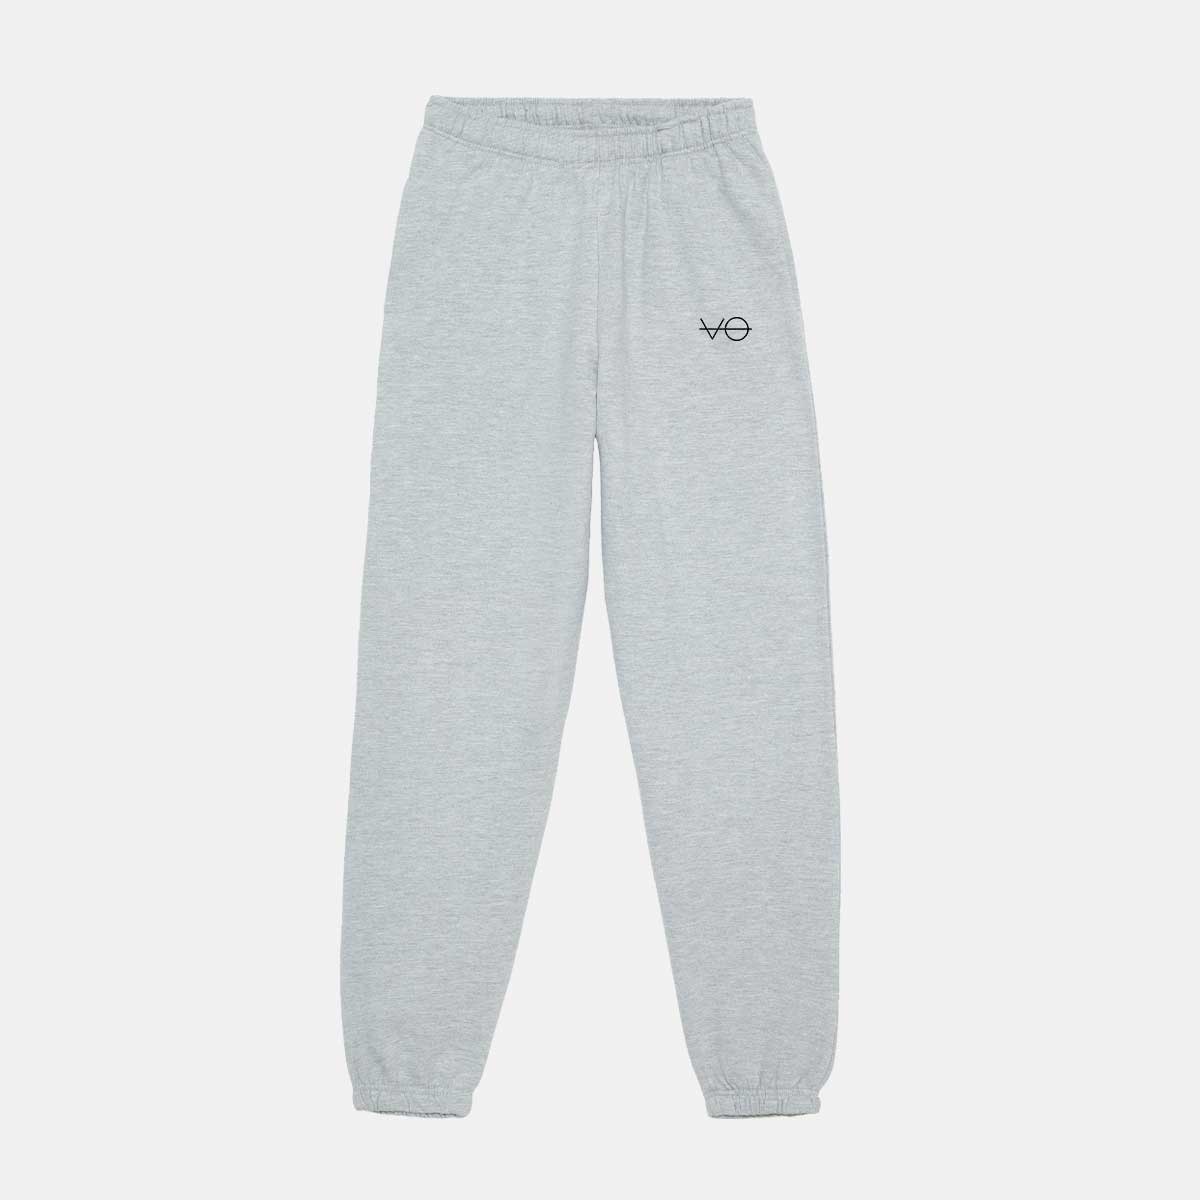 Classic Fit VO Embroidered Joggers